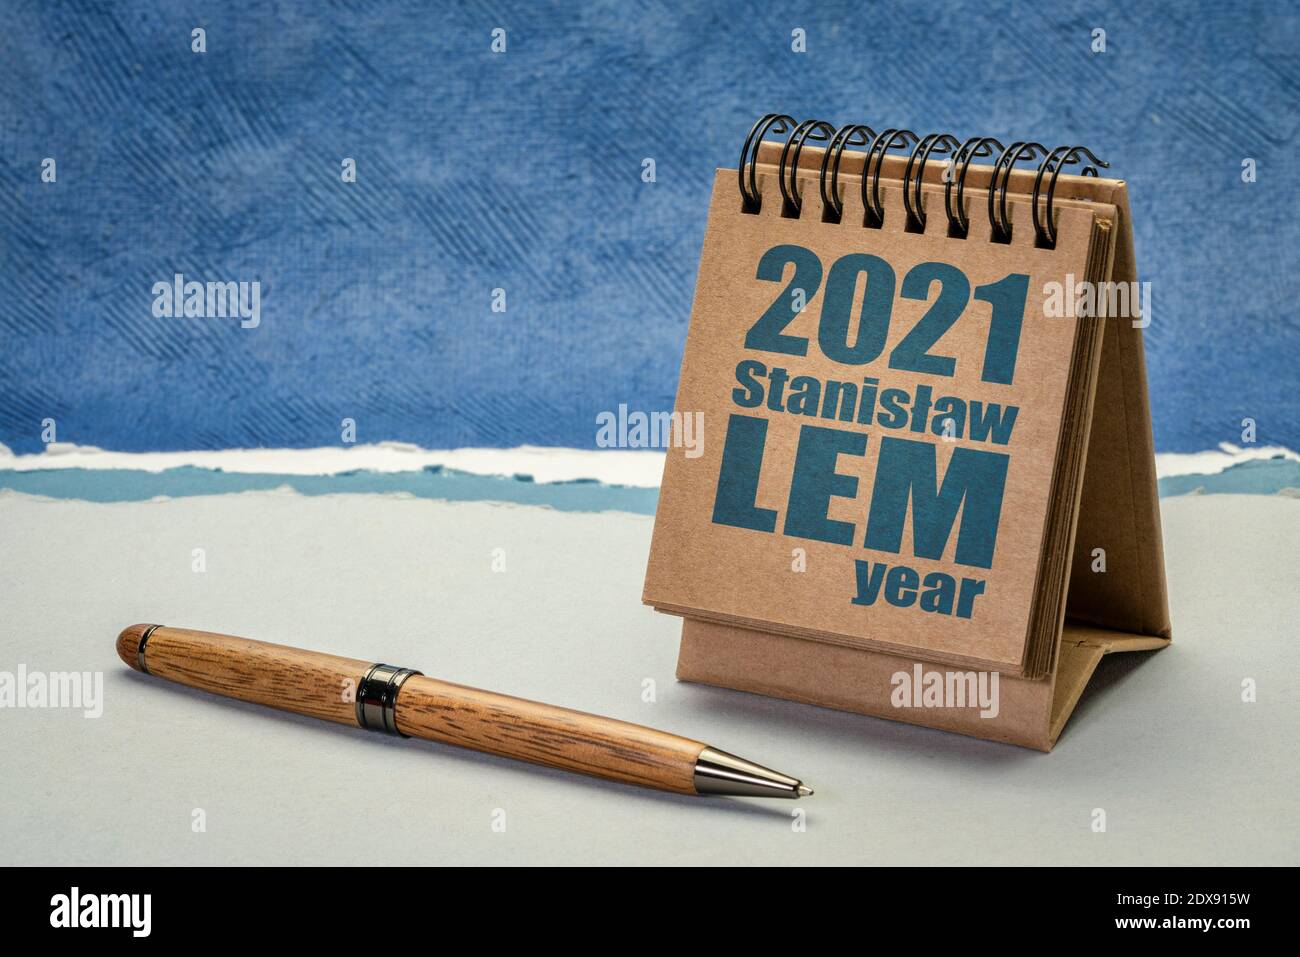 2021 year of Stanislaw Lem - Polish writer of science fiction and essays on various subjects, including philosophy, futurology, and literary criticism Stock Photo